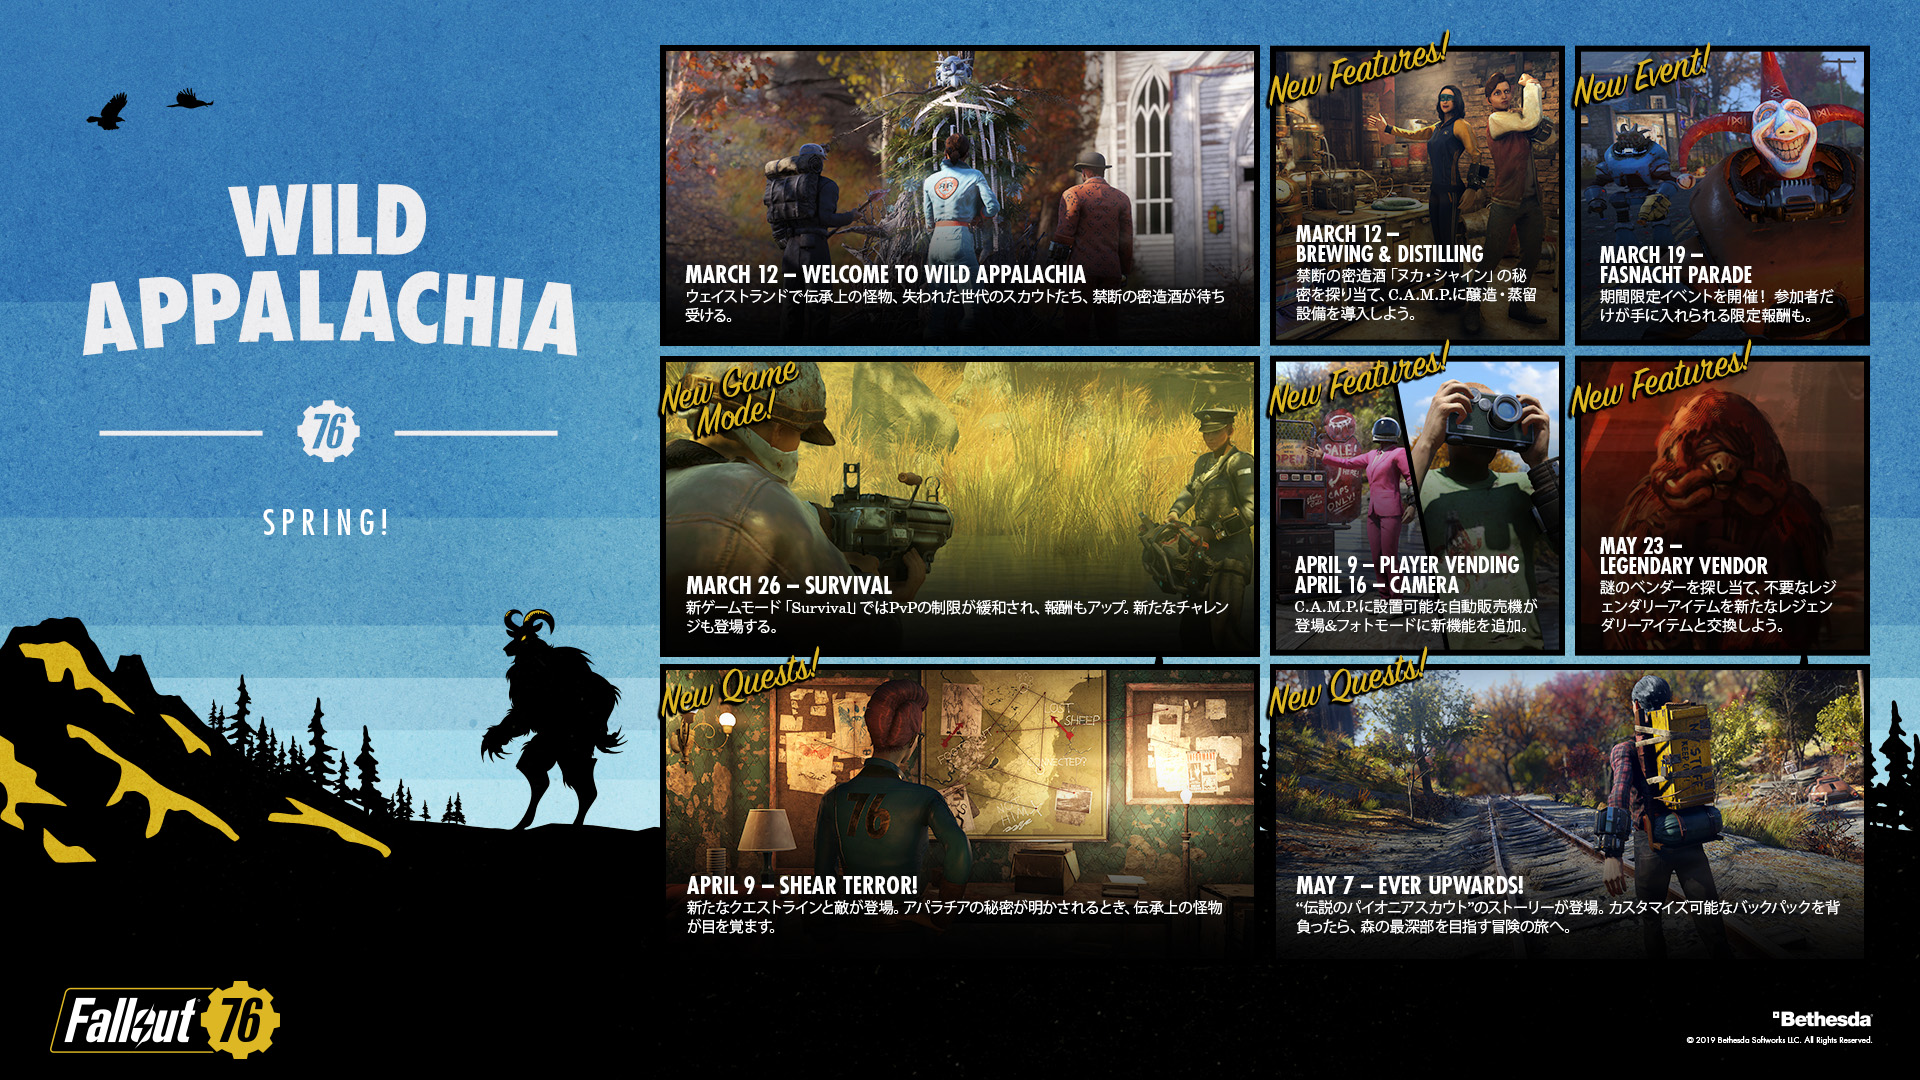 Fallout 76 3月12日より新アップデート Wild Appalachia スタート Game Watch